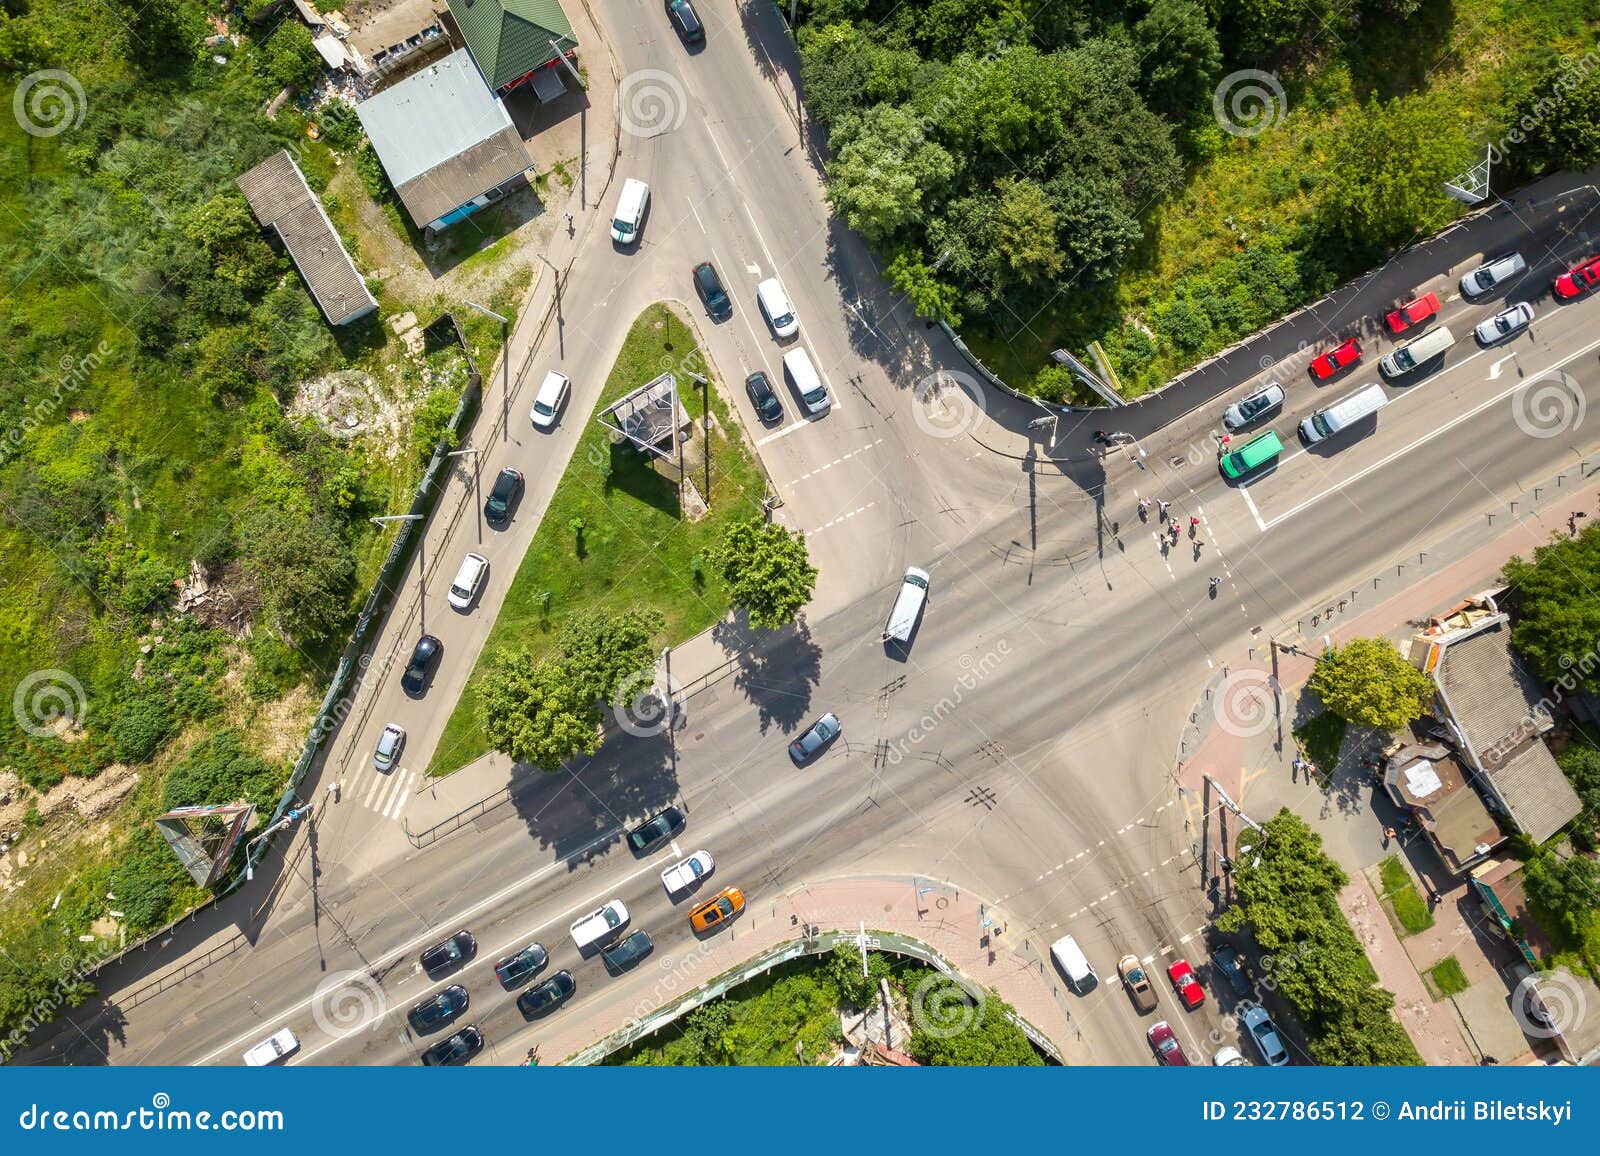 Top Down Aerial View of Busy Street Intersection with Moving Cars ...